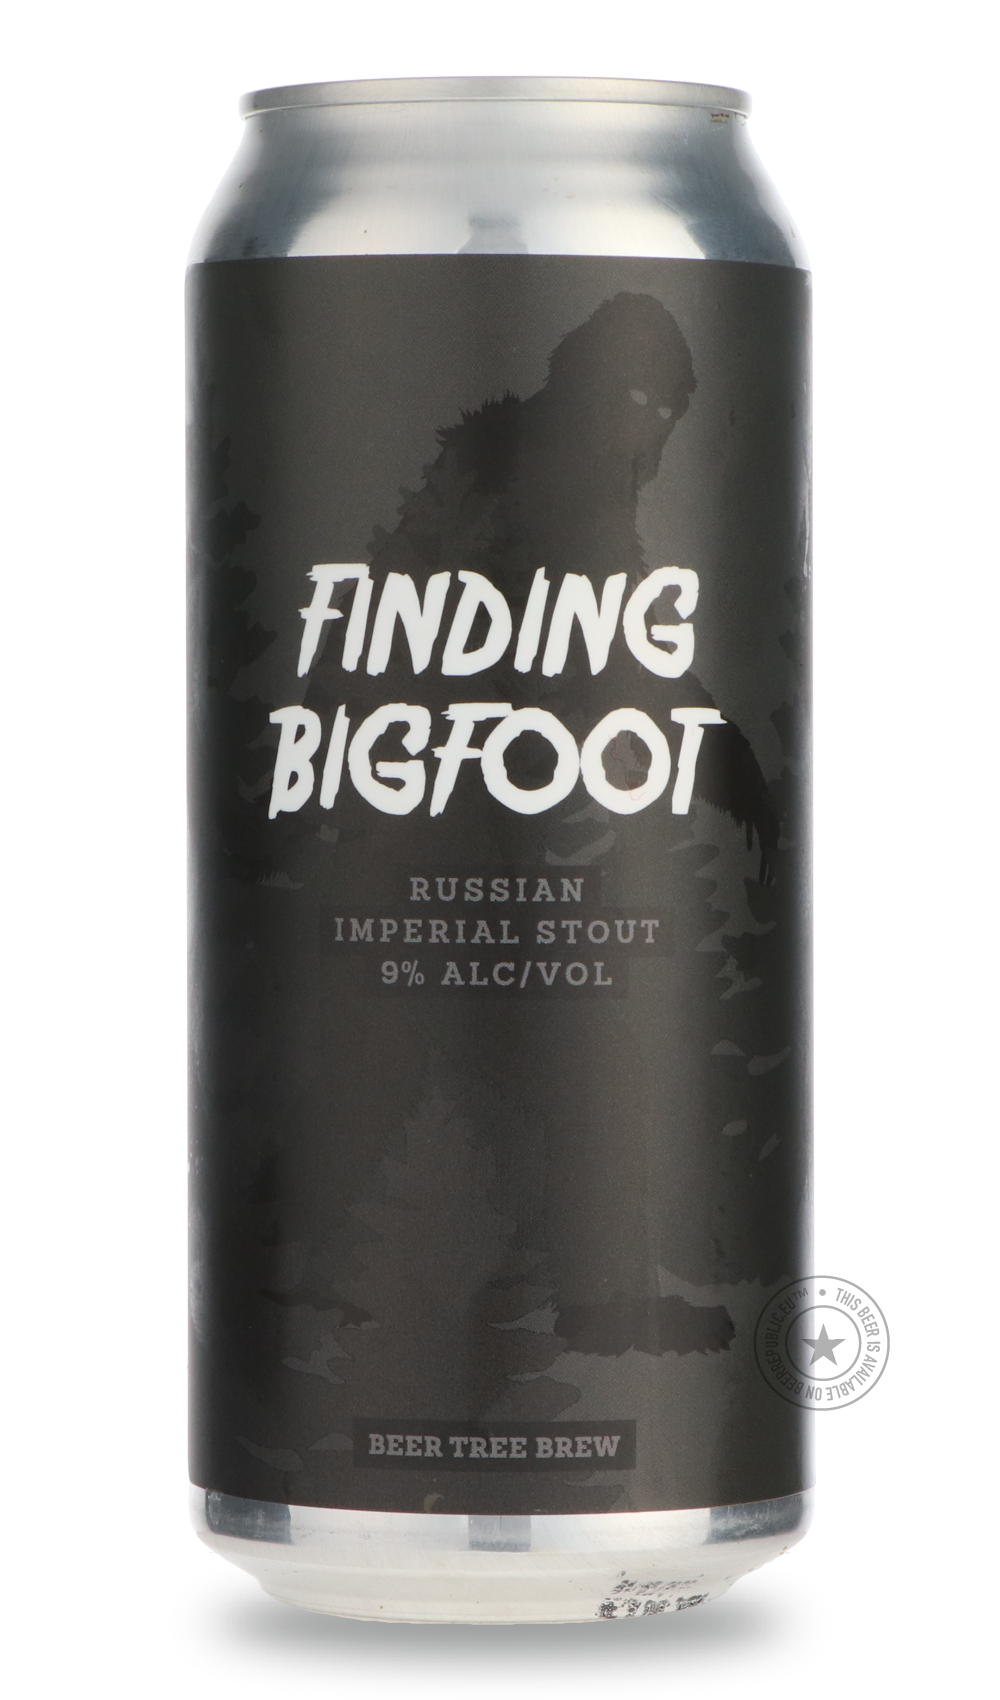 -Beer Tree- Finding Bigfoot-Stout & Porter- Only @ Beer Republic - The best online beer store for American & Canadian craft beer - Buy beer online from the USA and Canada - Bier online kopen - Amerikaans bier kopen - Craft beer store - Craft beer kopen - Amerikanisch bier kaufen - Bier online kaufen - Acheter biere online - IPA - Stout - Porter - New England IPA - Hazy IPA - Imperial Stout - Barrel Aged - Barrel Aged Imperial Stout - Brown - Dark beer - Blond - Blonde - Pilsner - Lager - Wheat - Weizen - Am